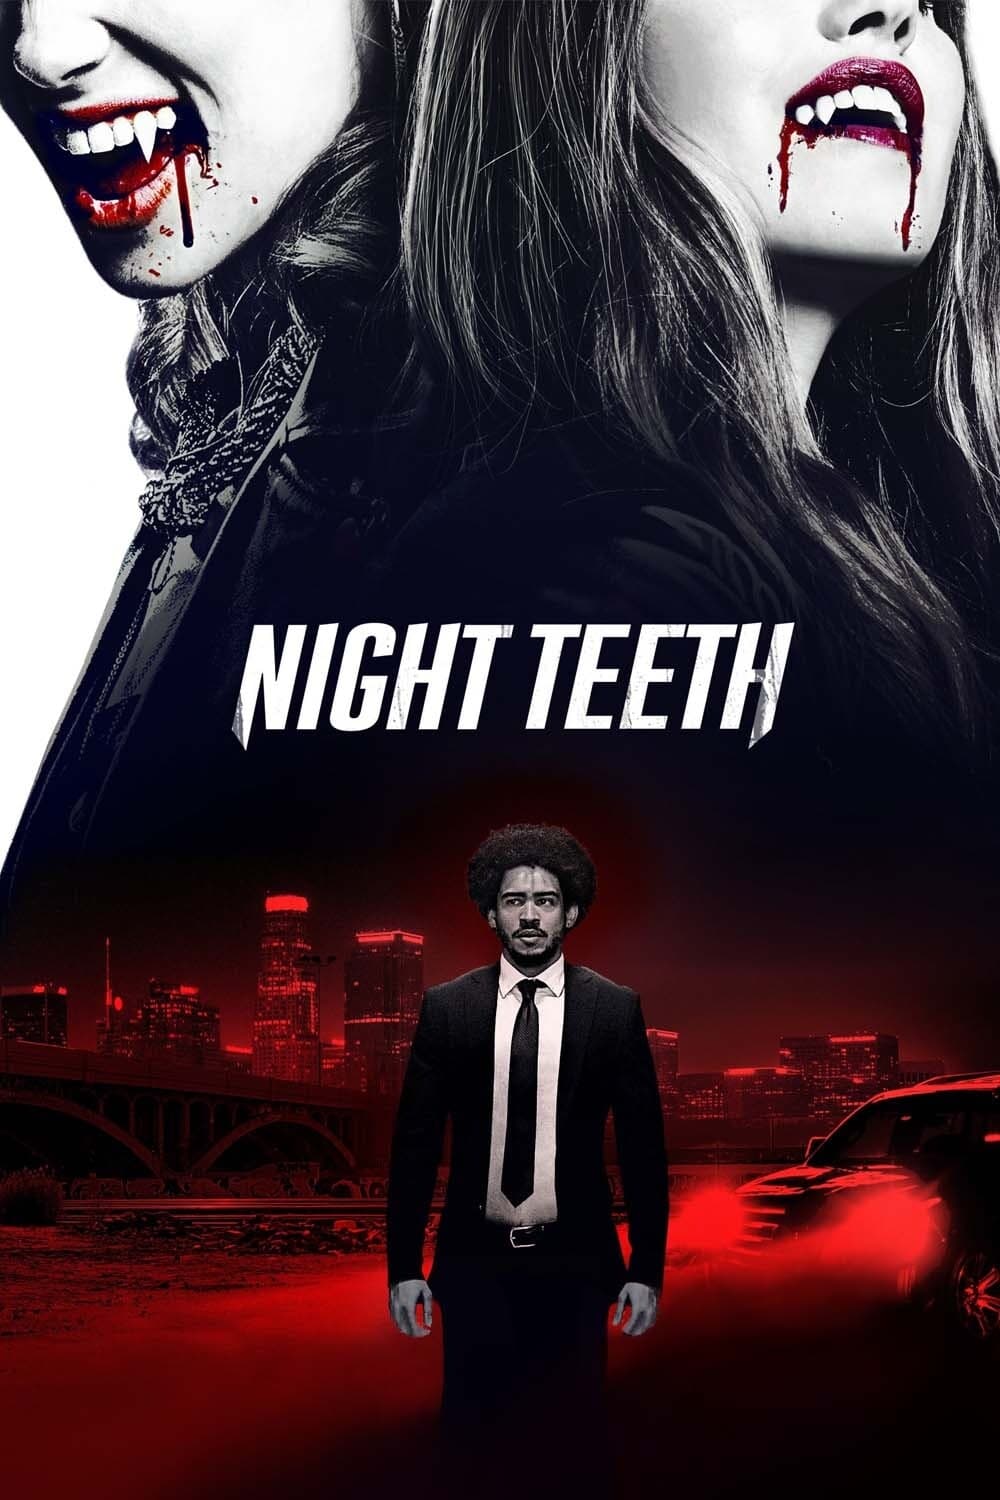 Poster for the movie "Night Teeth"